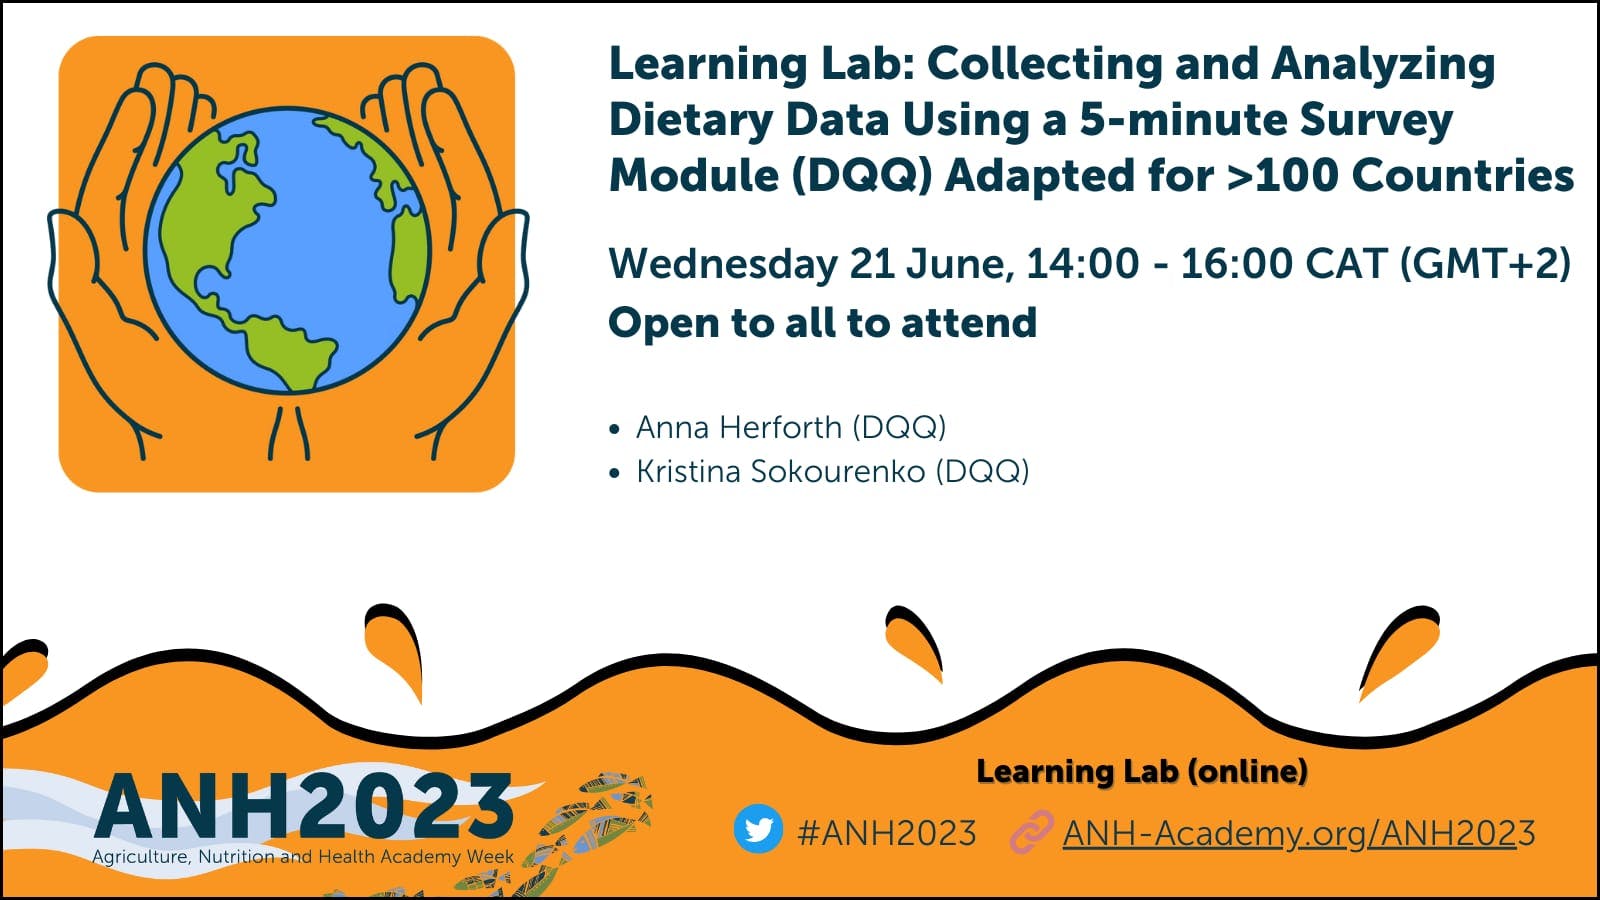 ANH Academy Week — Learning Lab: Collecting and Analyzing Dietary Data Using a 5-minute Survey Module (DQQ) Adapted for >100 Countries